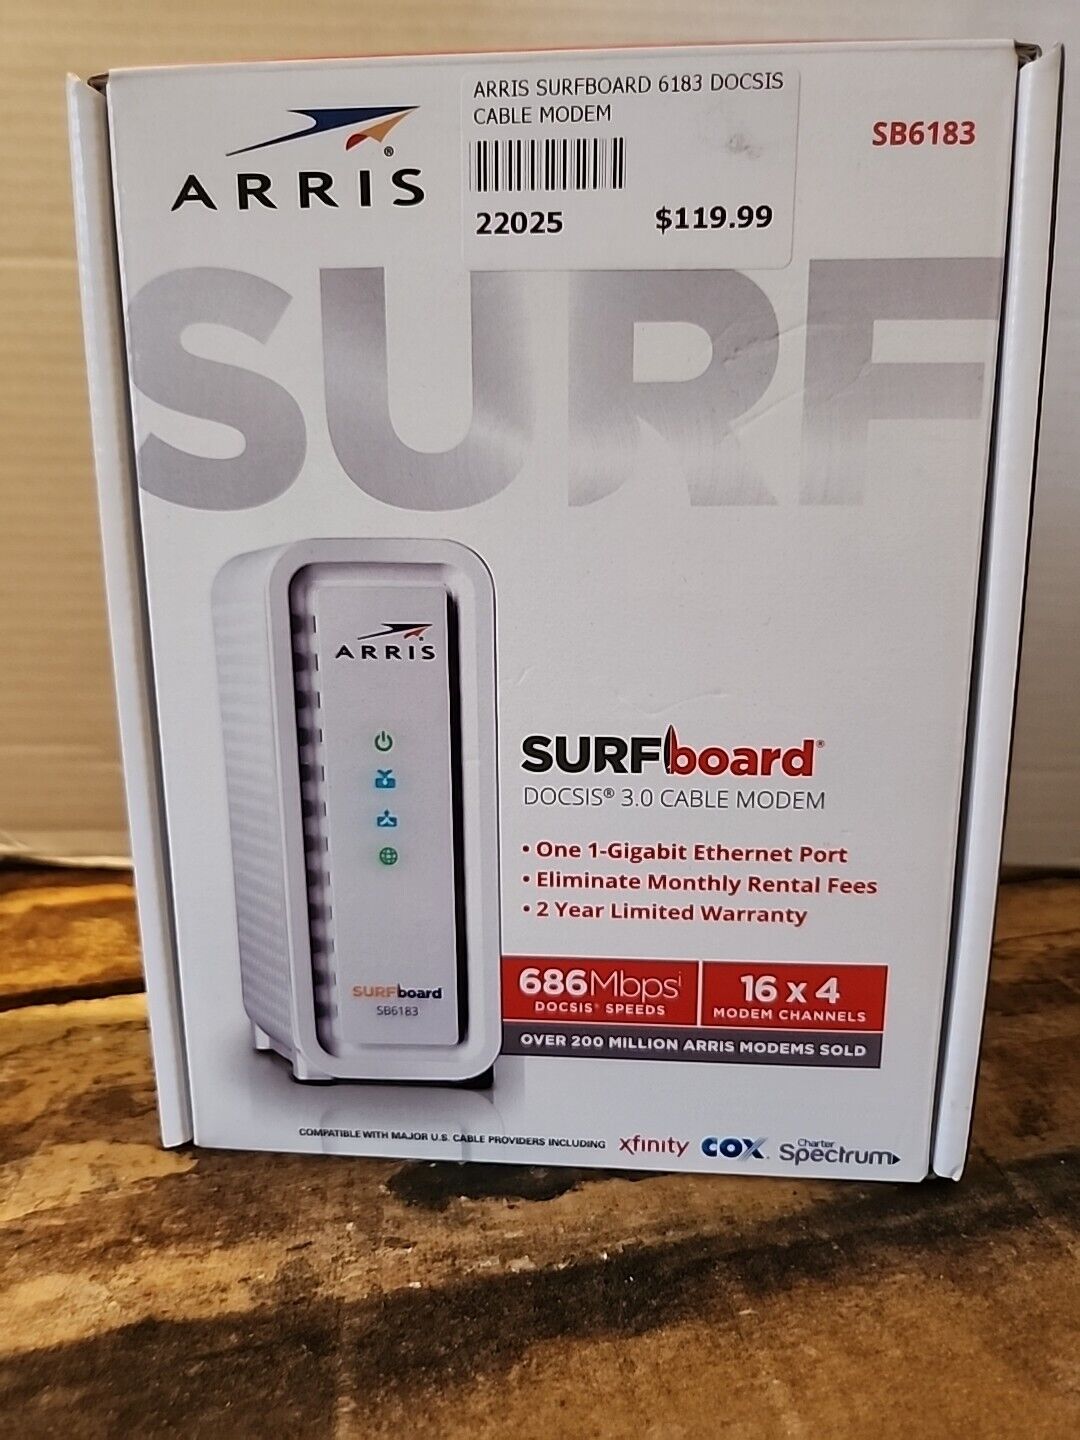 ARRIS SB6183 686 Mbps Cable Modem, White - 59243200300 New Opened Box